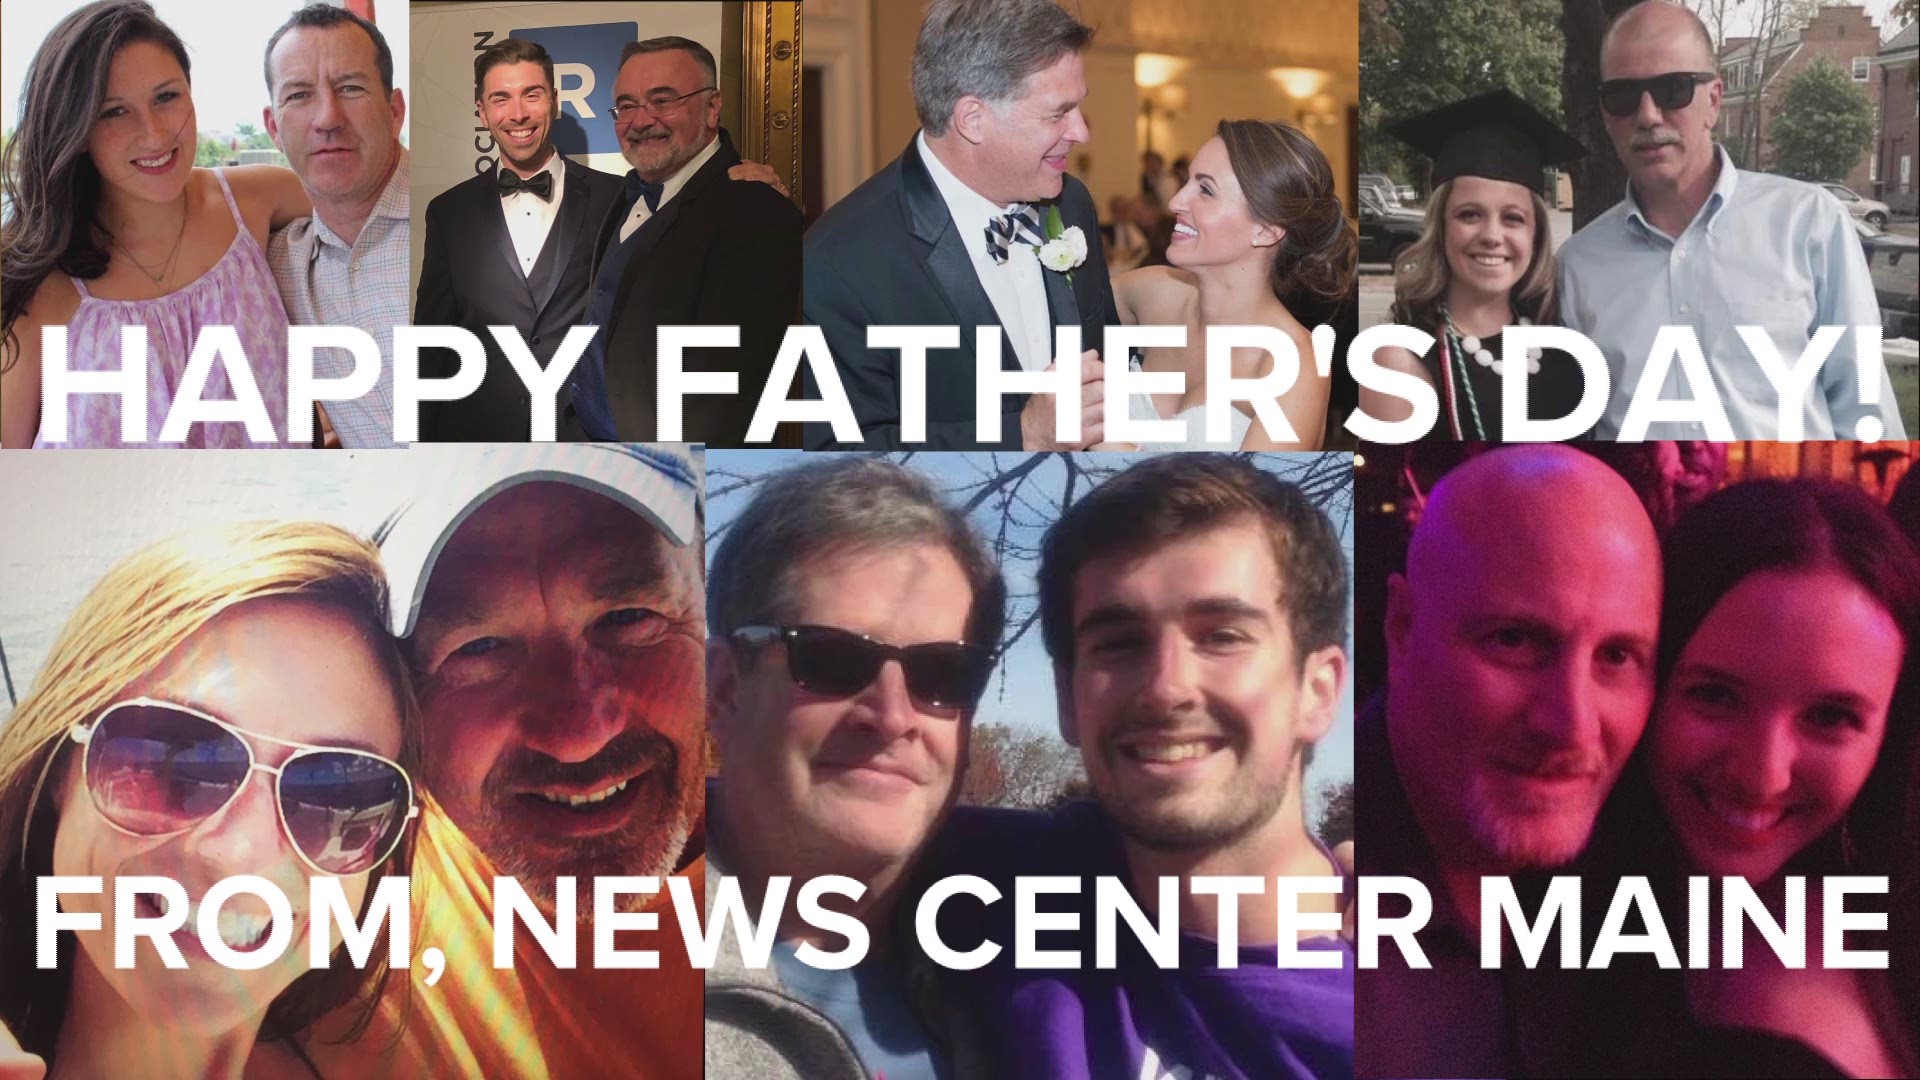 Seven members of the NEWS CENTER Maine team are thanking their dads on this special day for all that they do. Happy Father's Day!